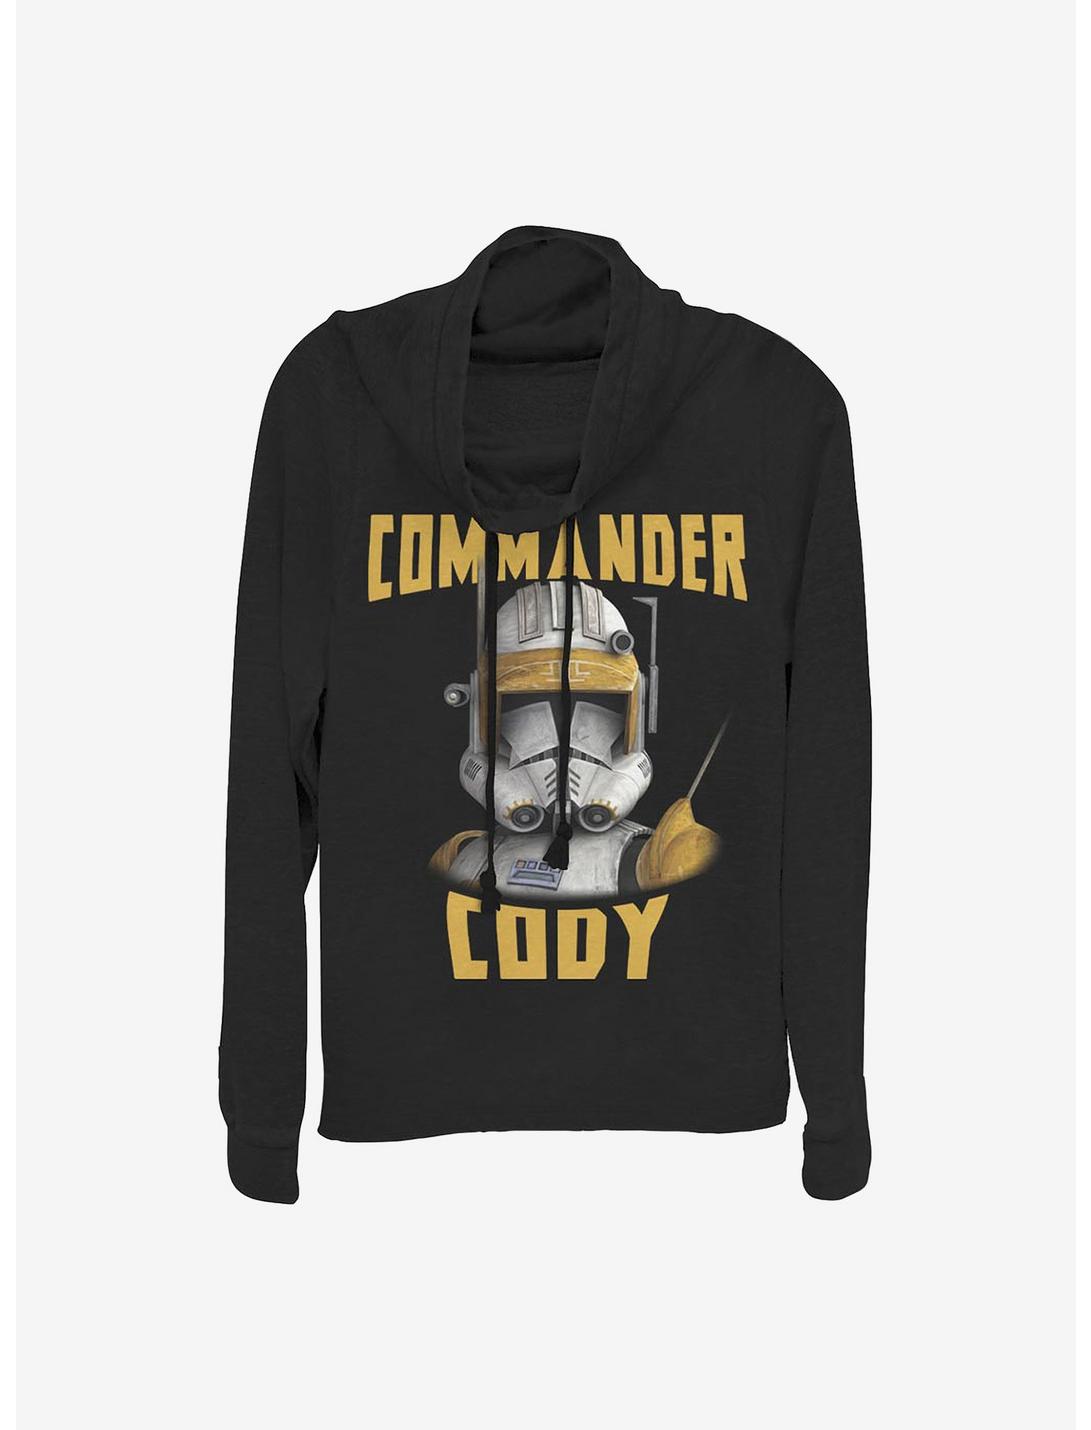 Star Wars: The Clone Wars Cody Face Cowlneck Long-Sleeve Girls Top, BLACK, hi-res